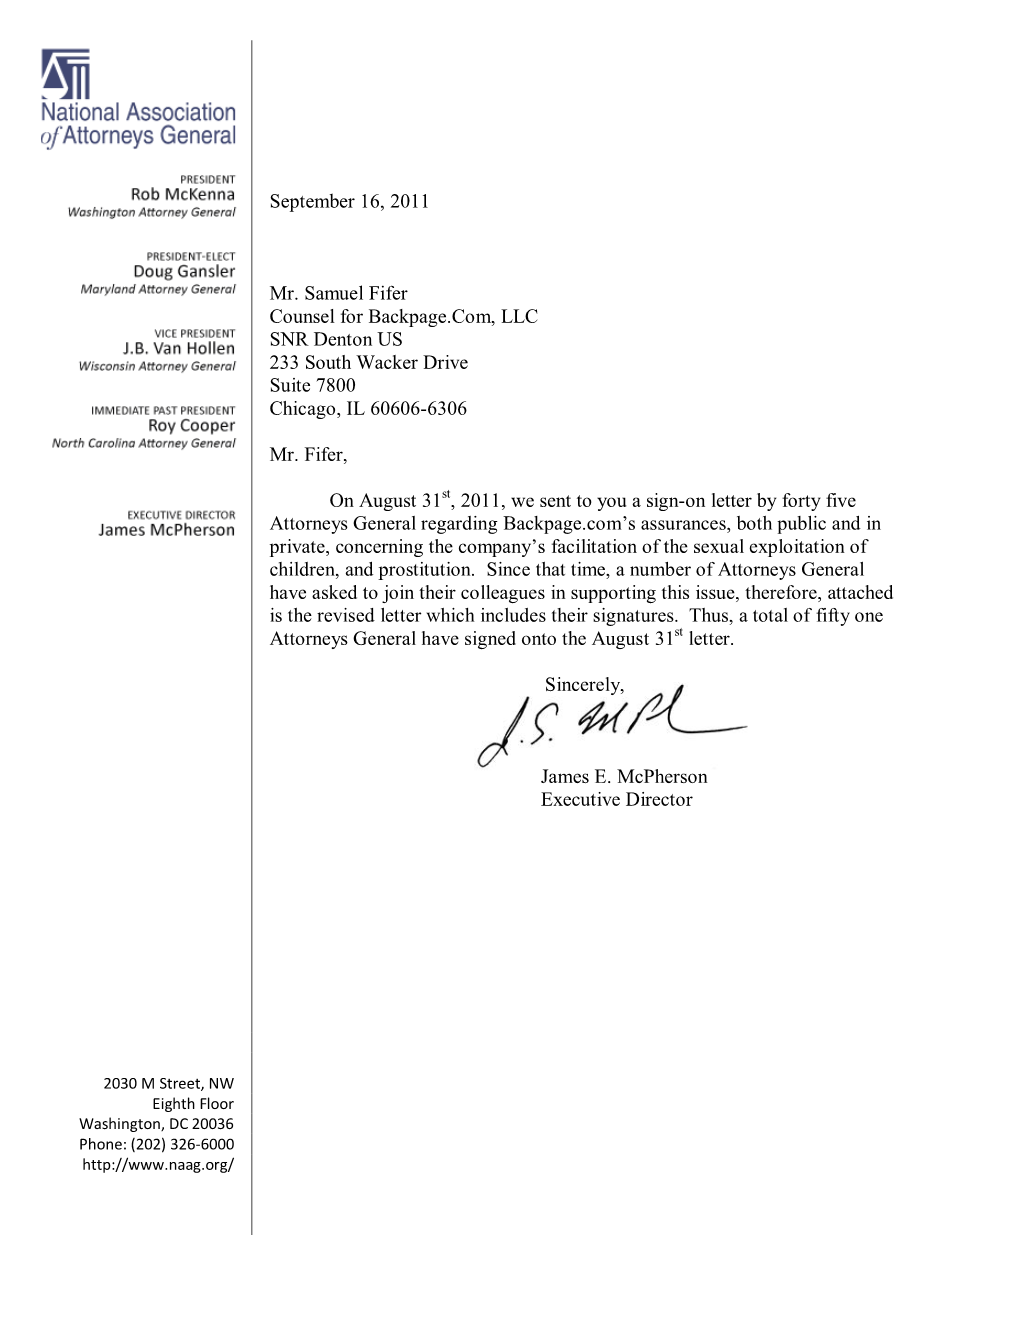 Joint AG Letter to Backpage.Com